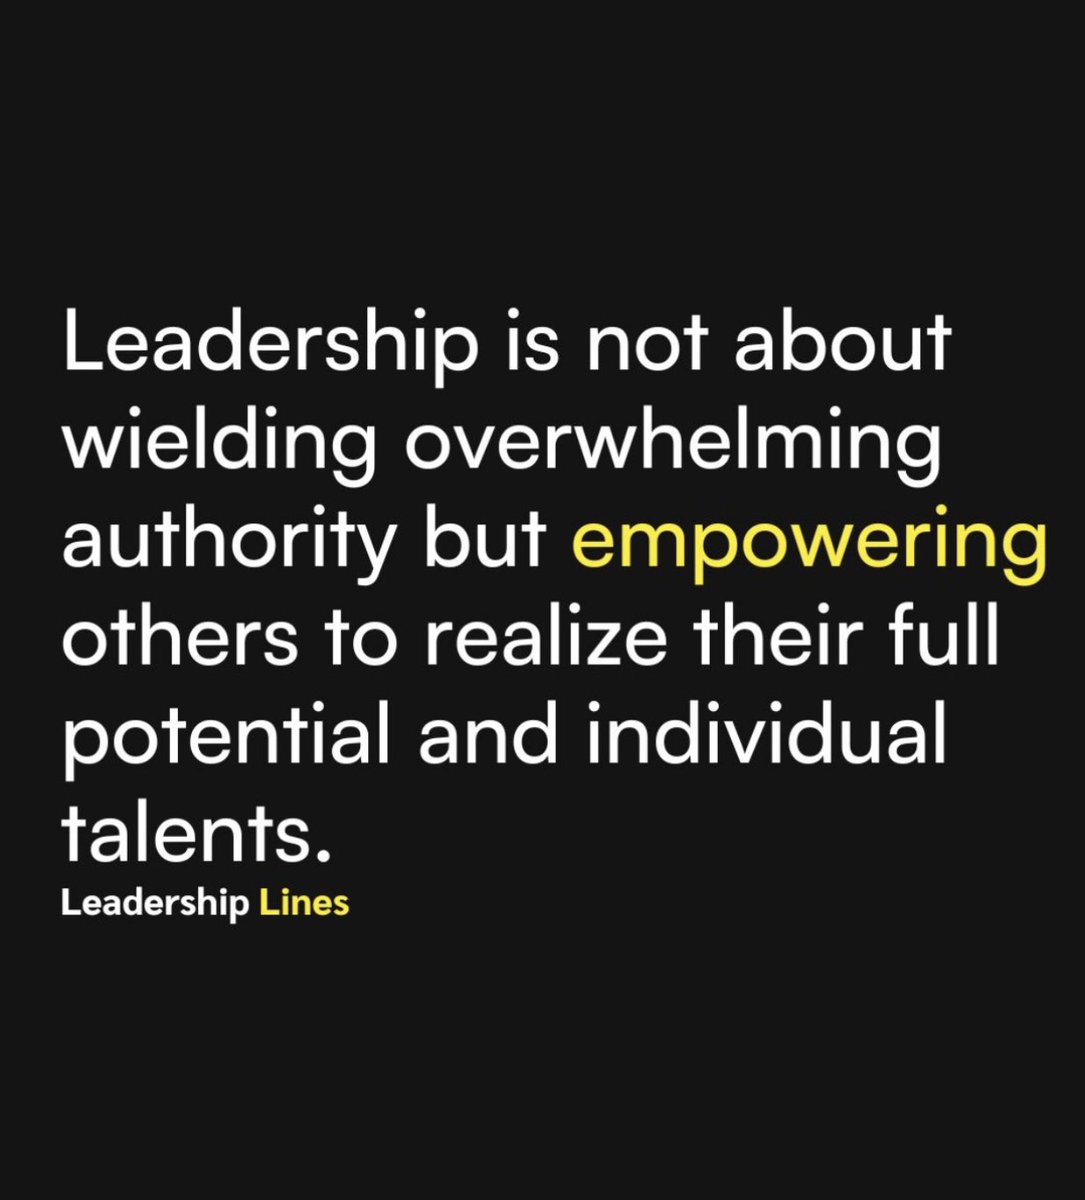 True leadership is not about controlling others, but about uplifting and empowering them to reach their full potential. By fostering a culture of empowerment, we inspire creativity, collaboration, and growth.

#EmpowerLeadership #InspireEmpowerGrow